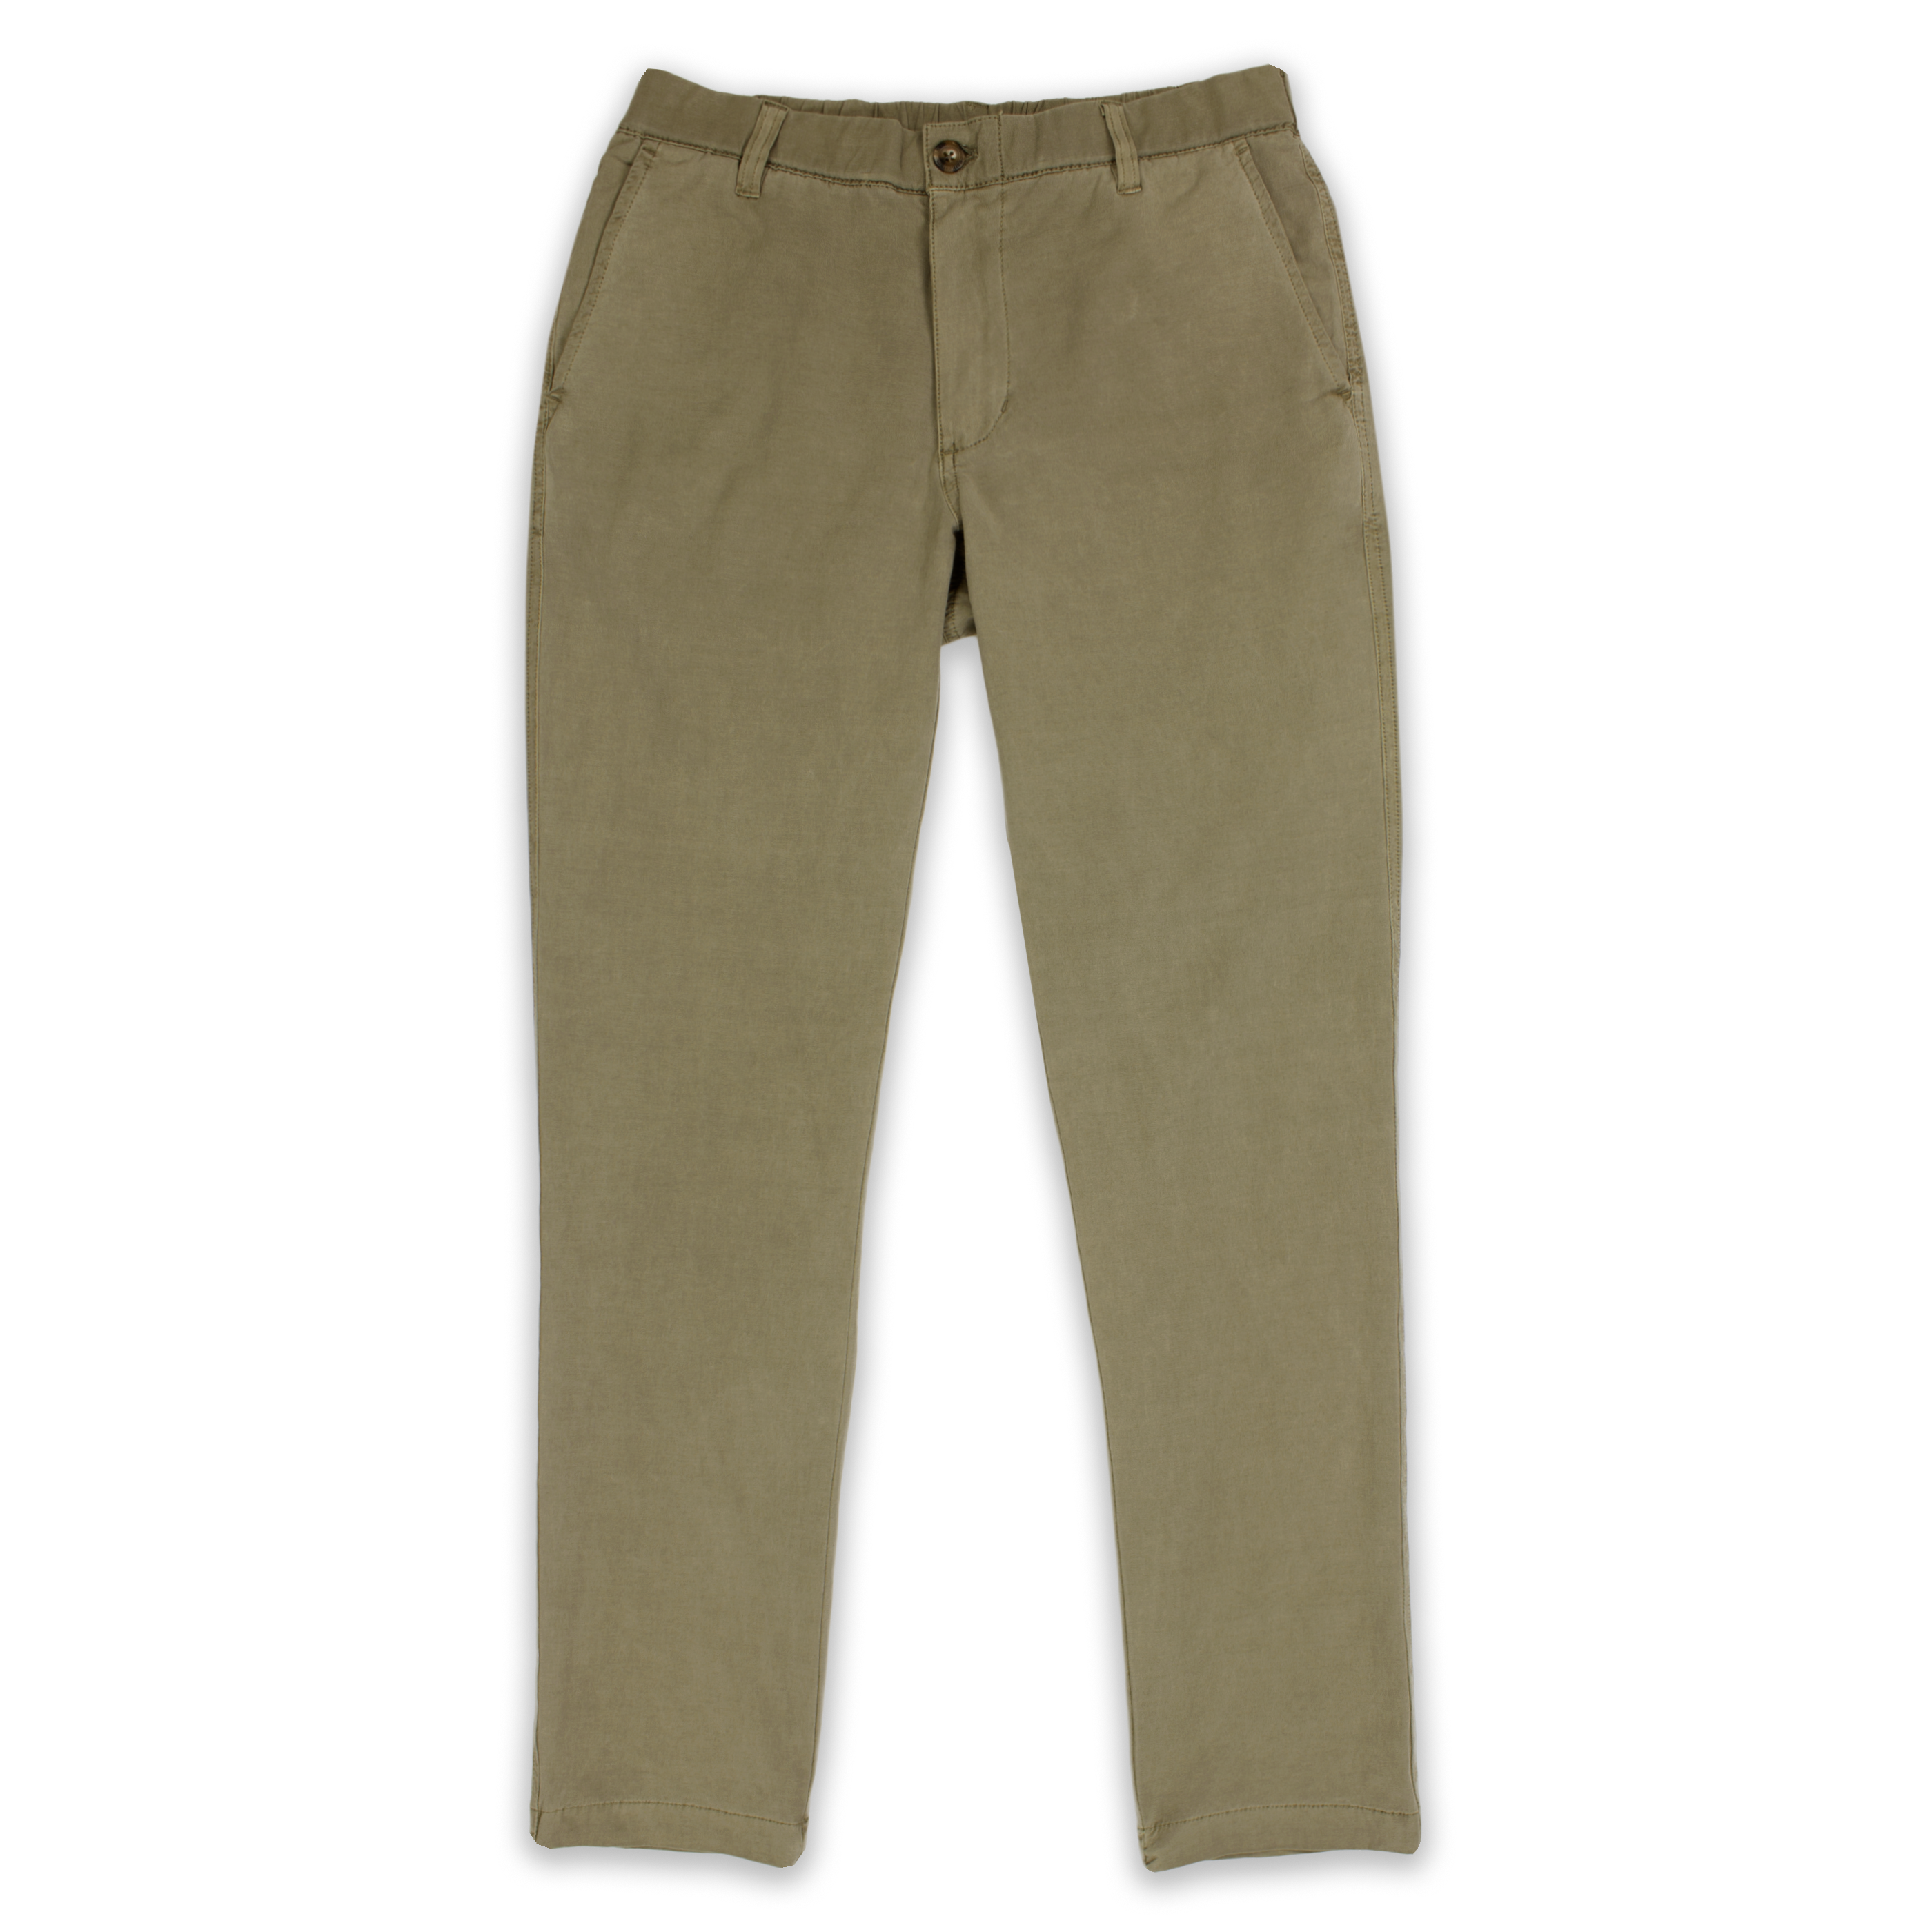 Volley Pant Khaki with flat front elastic waistband, belt loops, two front pockets, faux-horn button and zippered fly